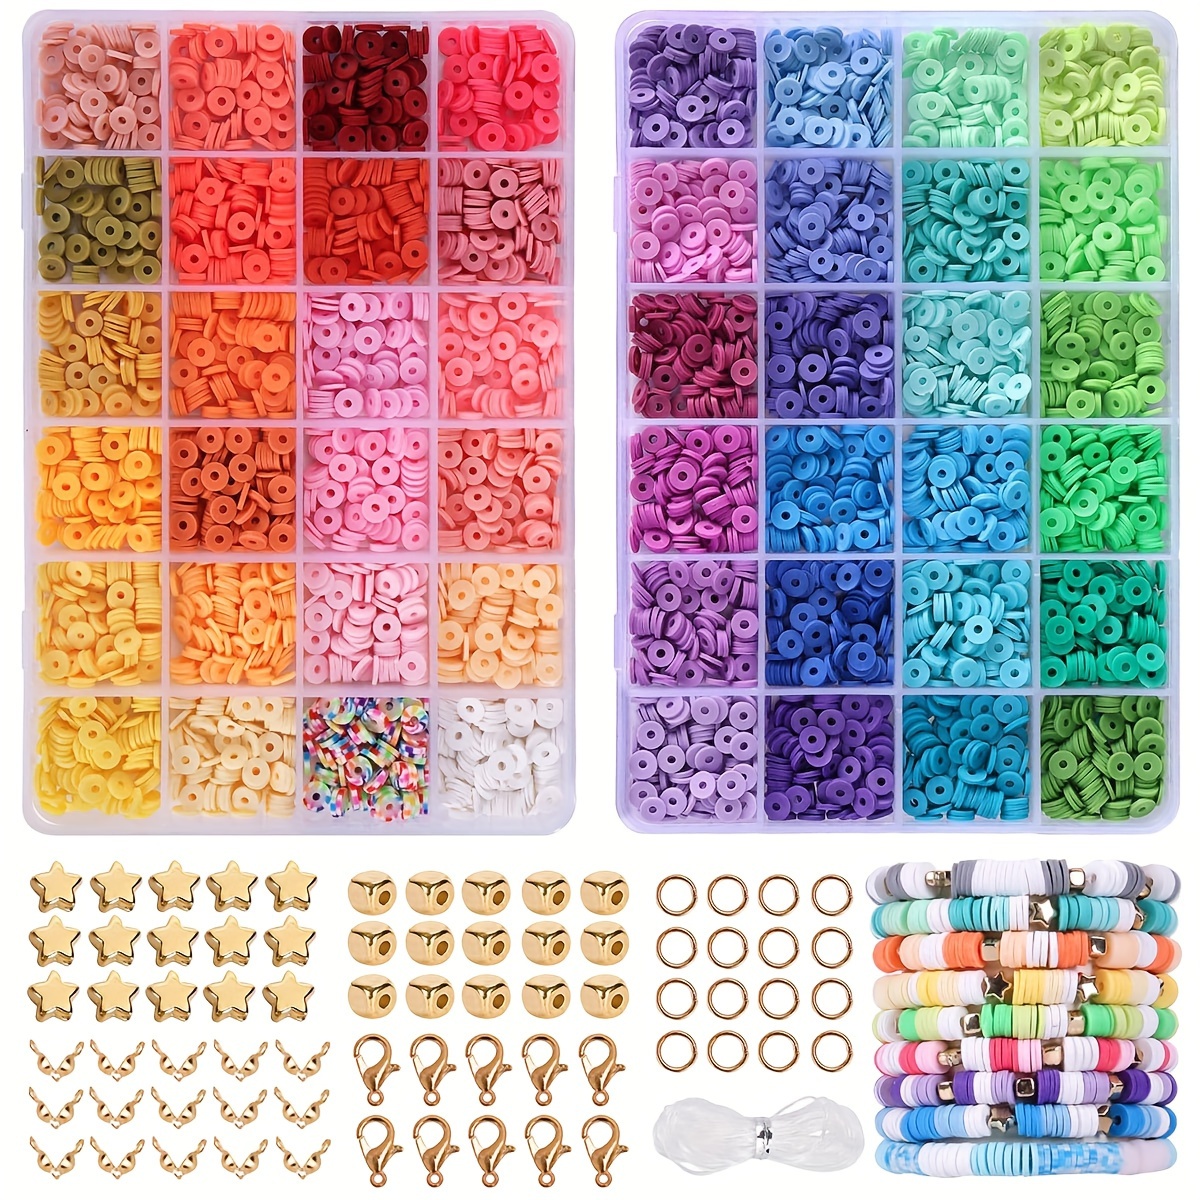 

1102/4952pcs Polymer Clay Beads For Jewelry Making Diy Friendship Bracelet Necklace Earrings Craft Gift With Charms Kit